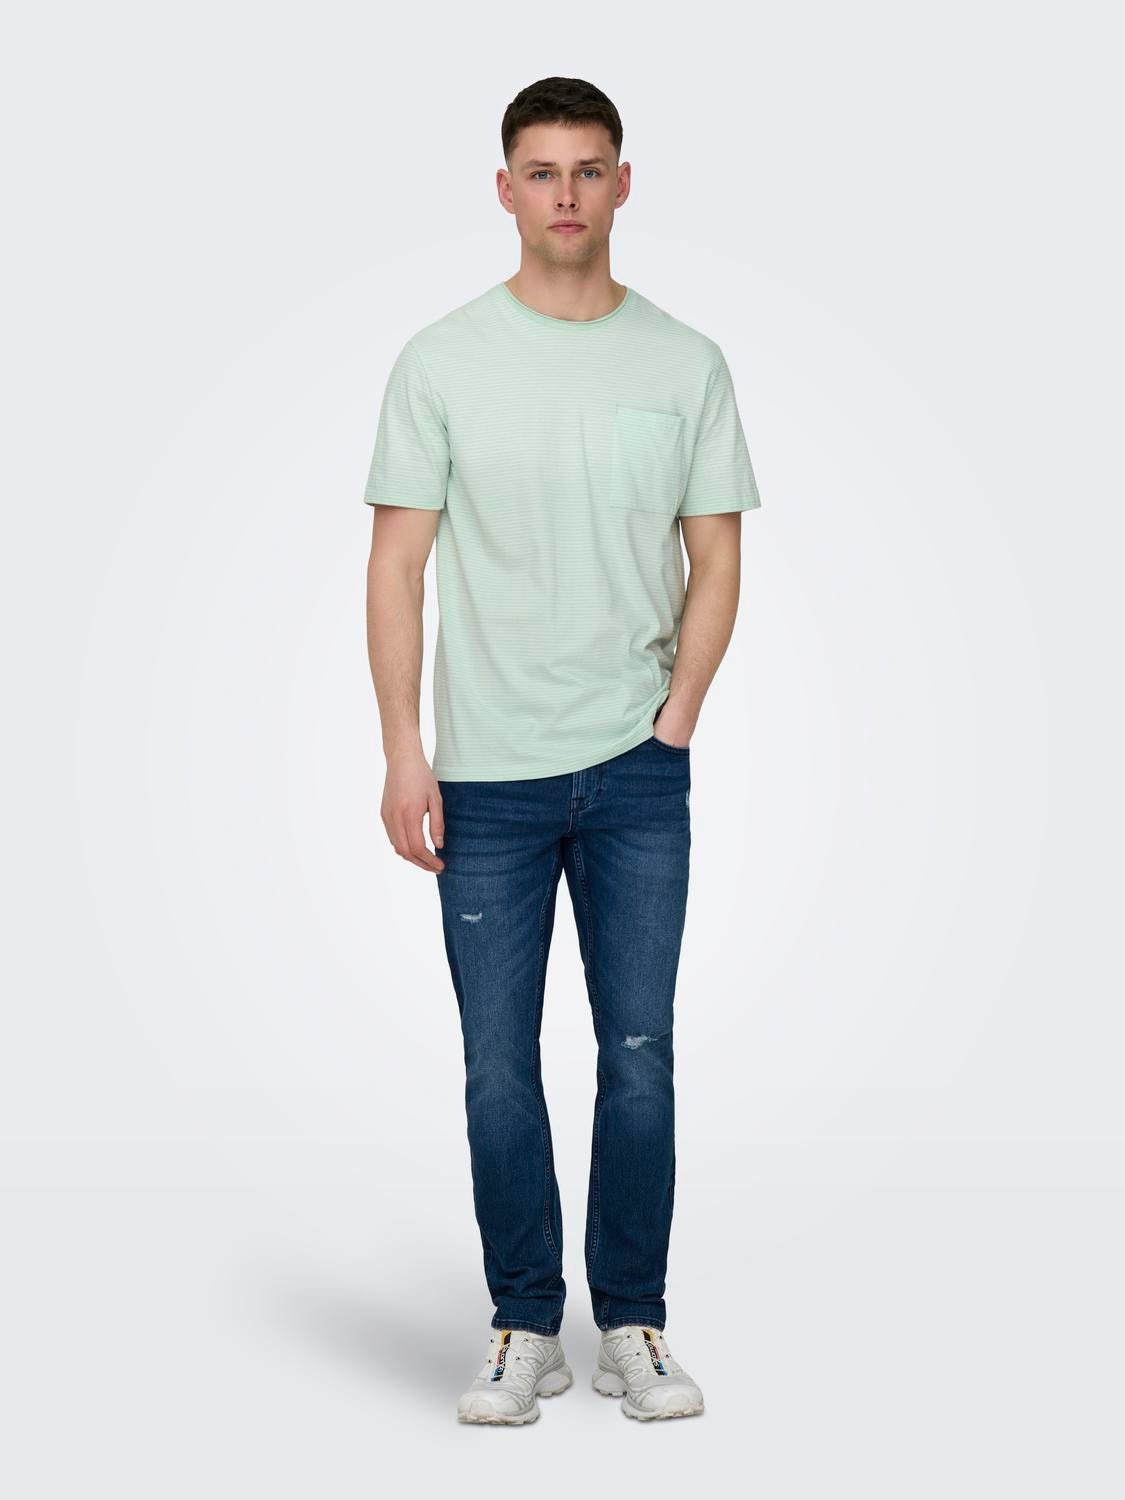 ONLY & SONS Regular Fit Round Neck T-Shirt -Surf Spray - 22025680